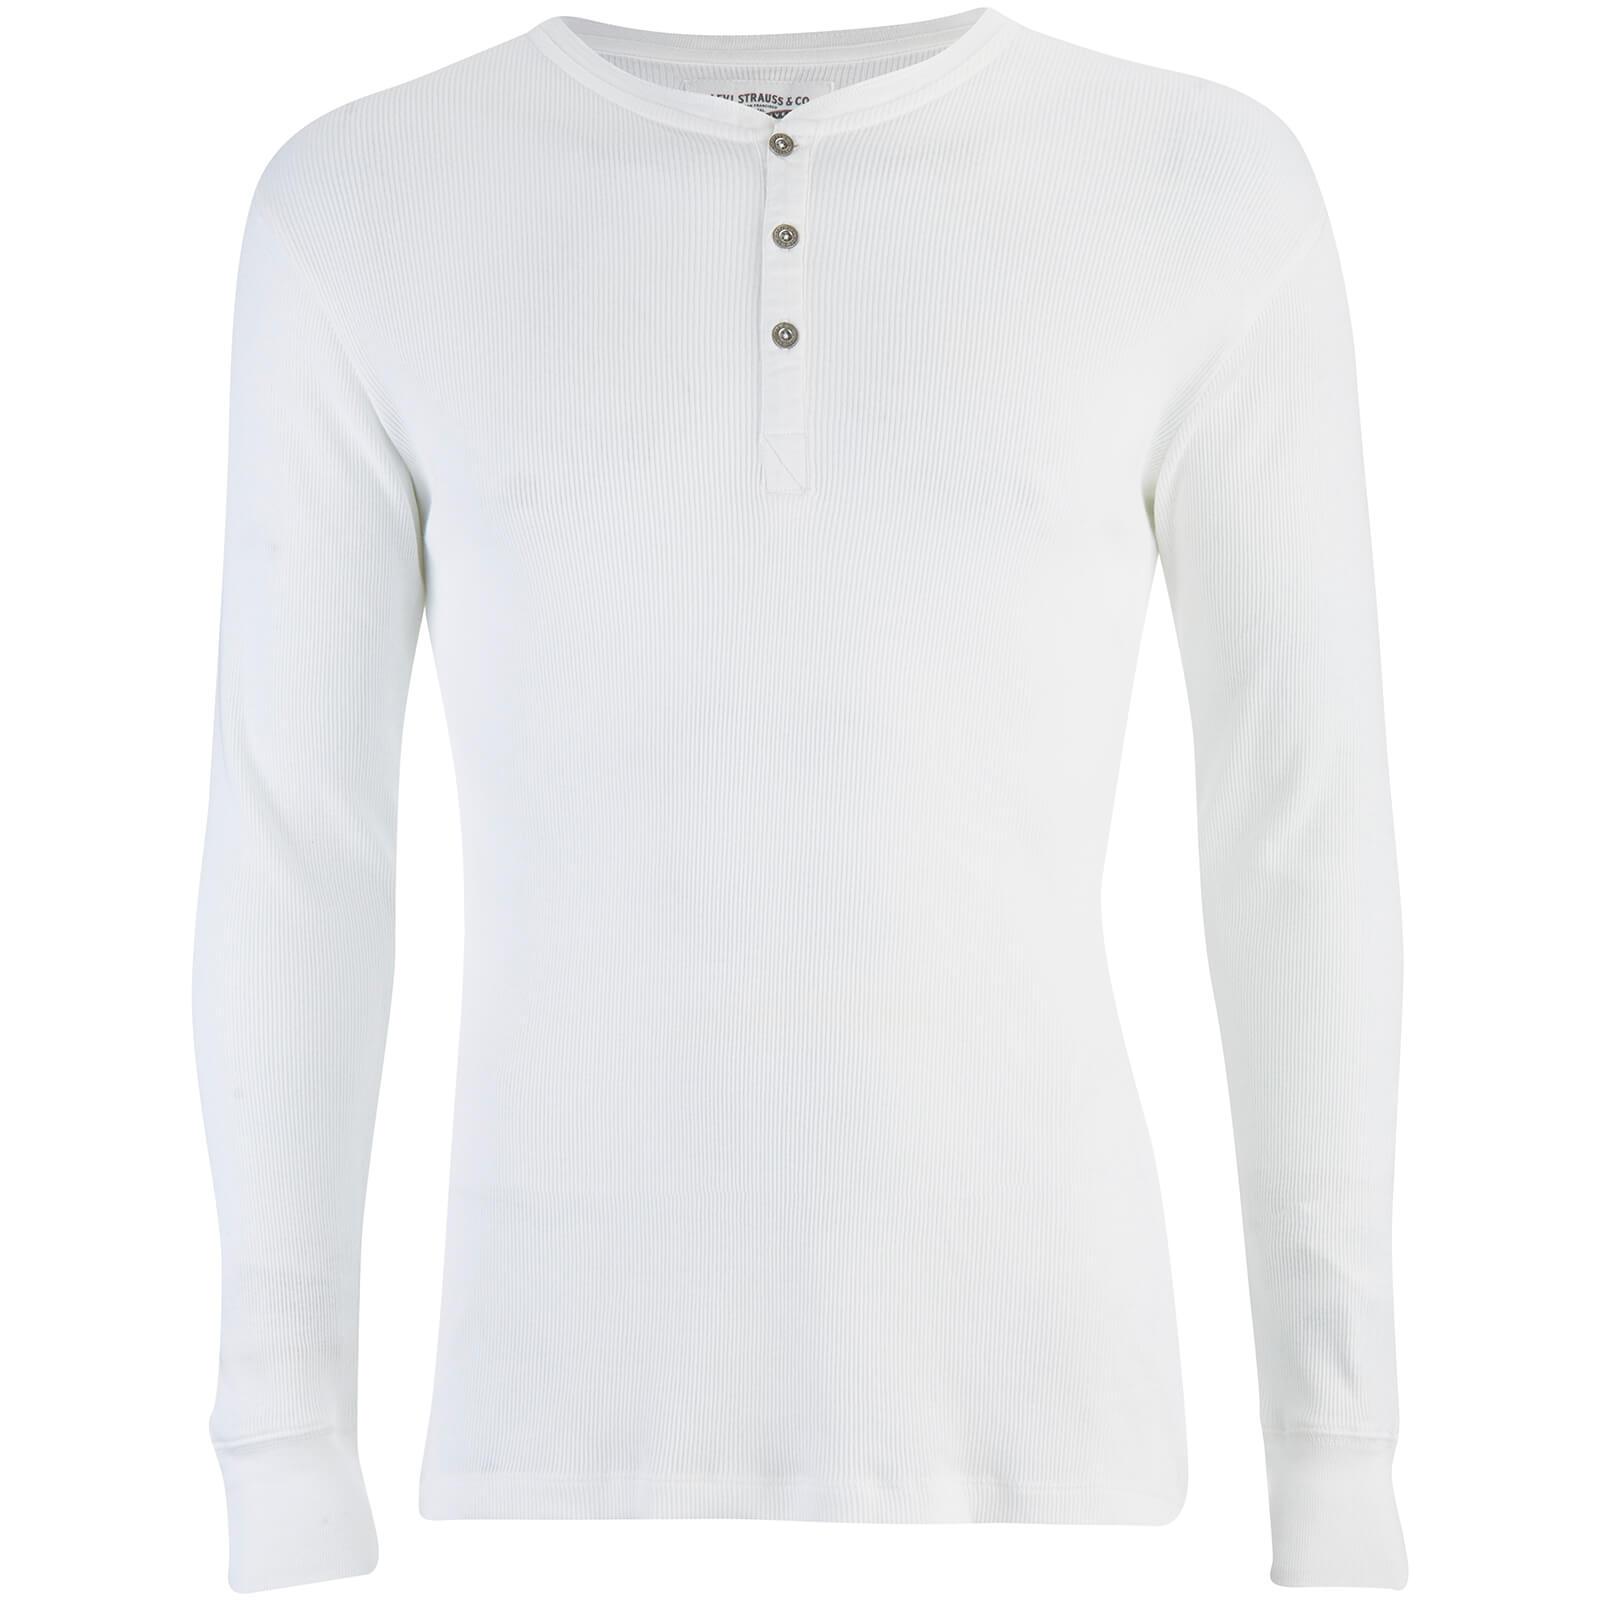 Levi's Cotton Long Sleeve Grandad Top in White for Men - Lyst